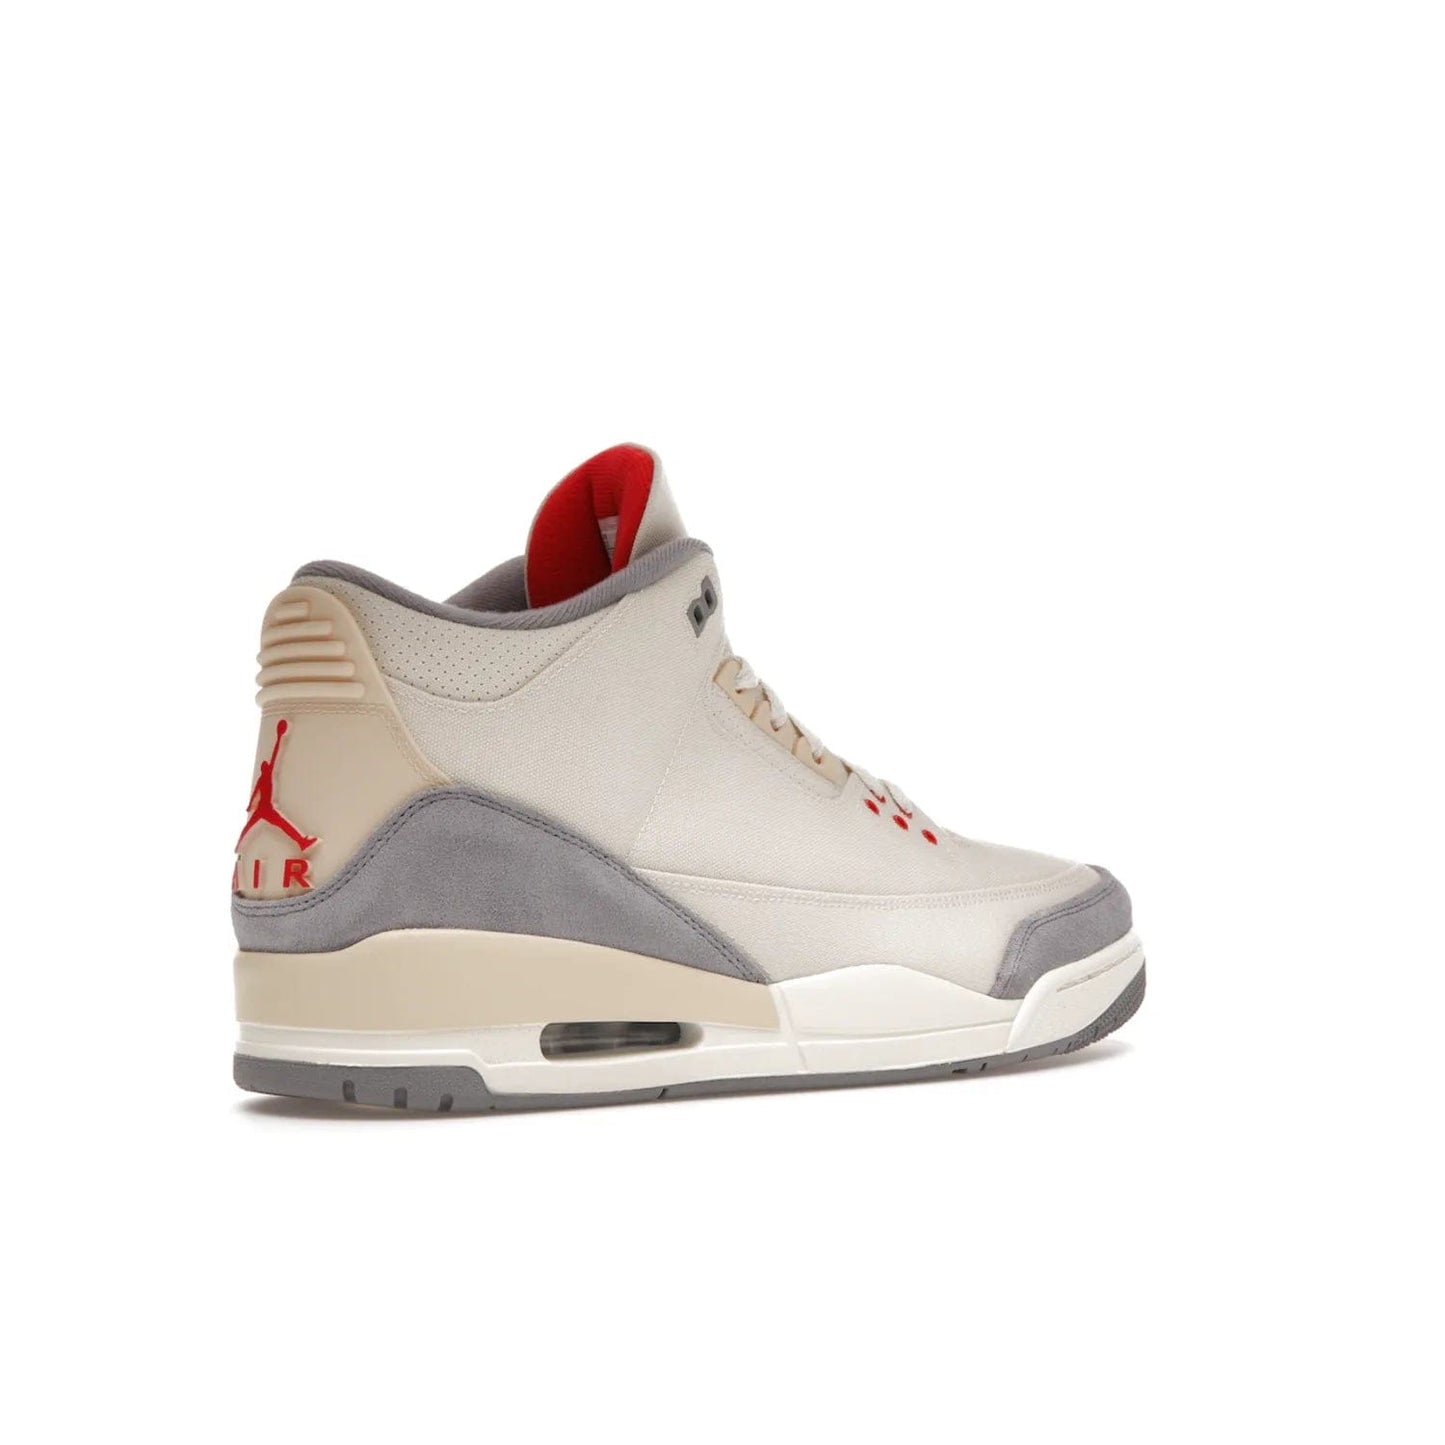 Jordan 3 Retro Muslin - Image 33 - Only at www.BallersClubKickz.com - Eye-catching Air Jordan 3 Retro Muslin in a neutral palette of grey, cream, and red. Featuring canvas upper, suede overlays and white/grey Air Max sole. Available in March 2022.